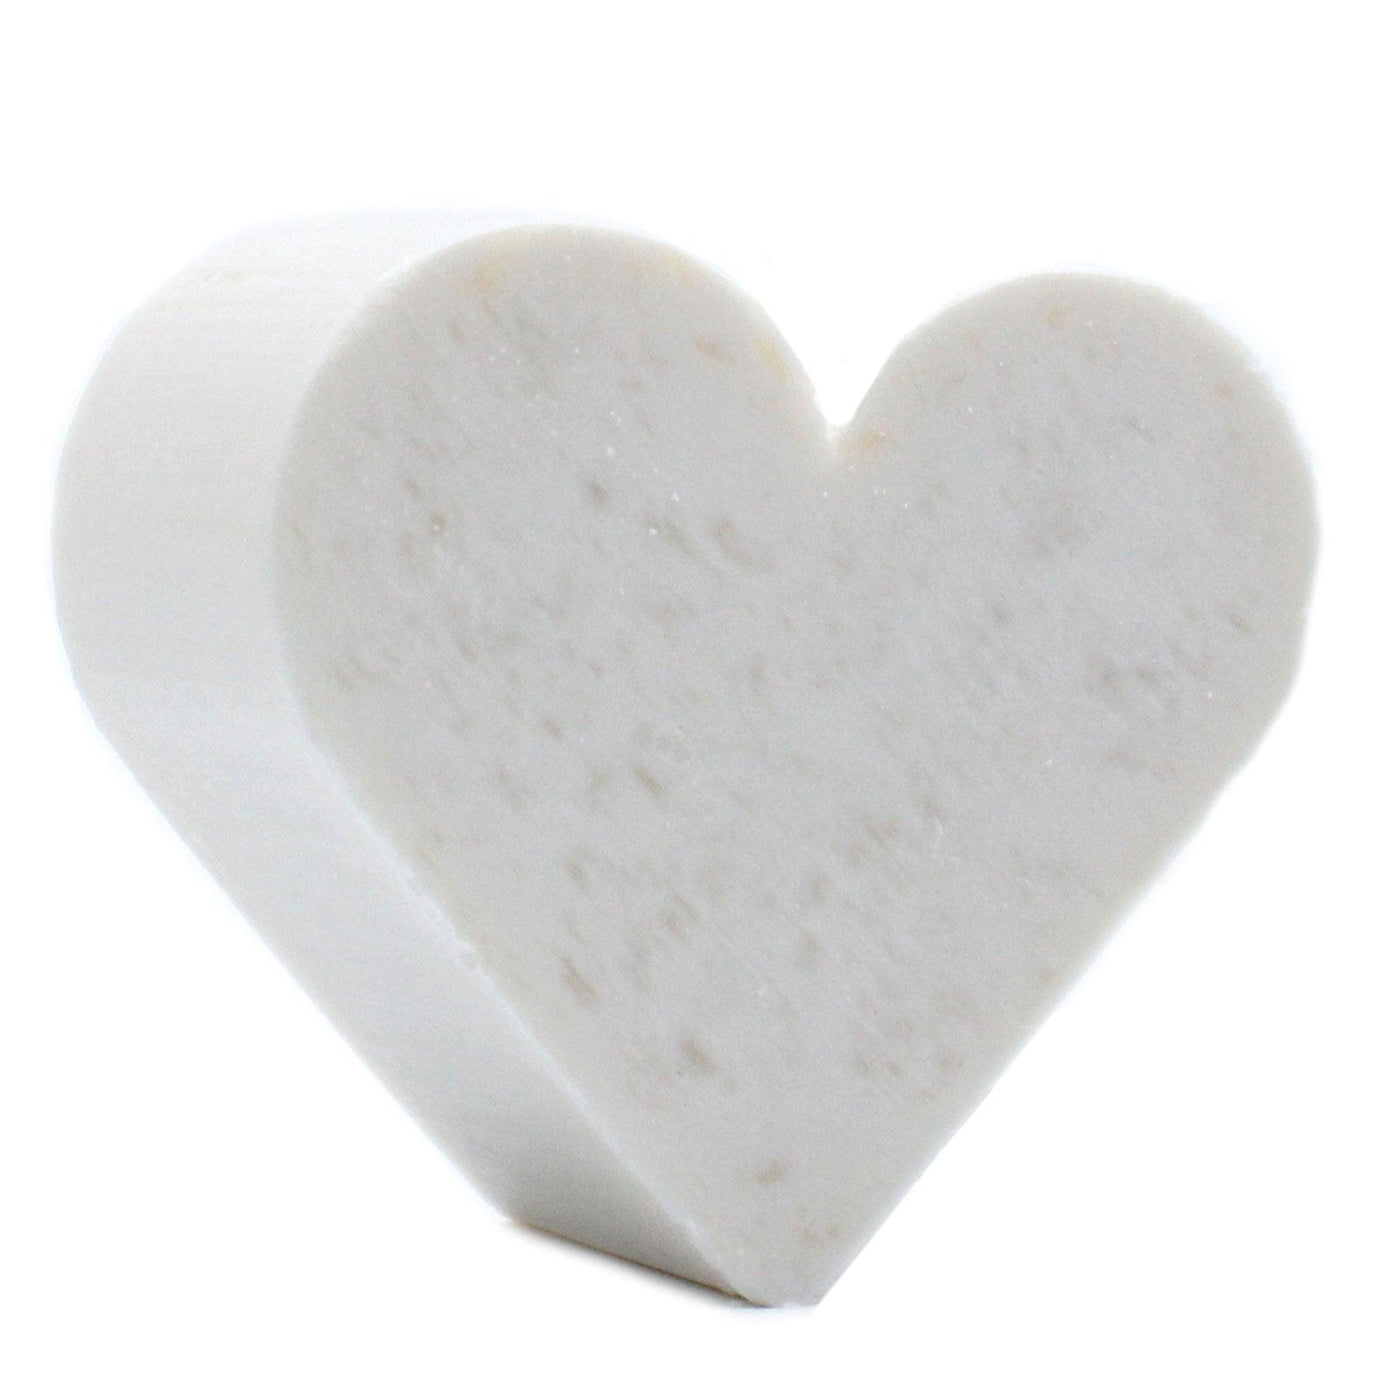 10x Green Heart Shaped Paraben Free Guest Soap - Coconut.